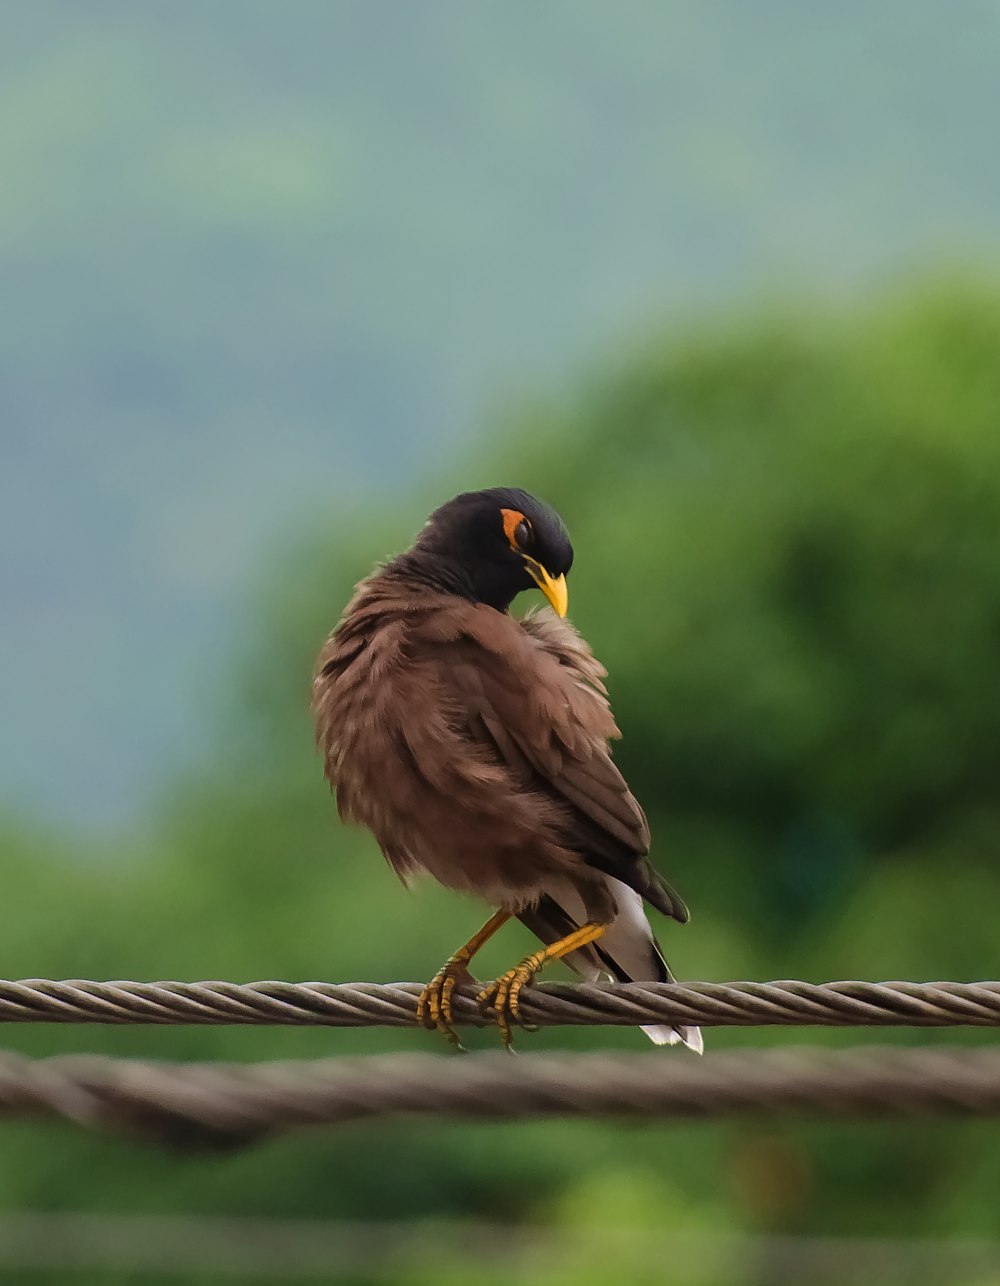 brown and black bird on brown rope